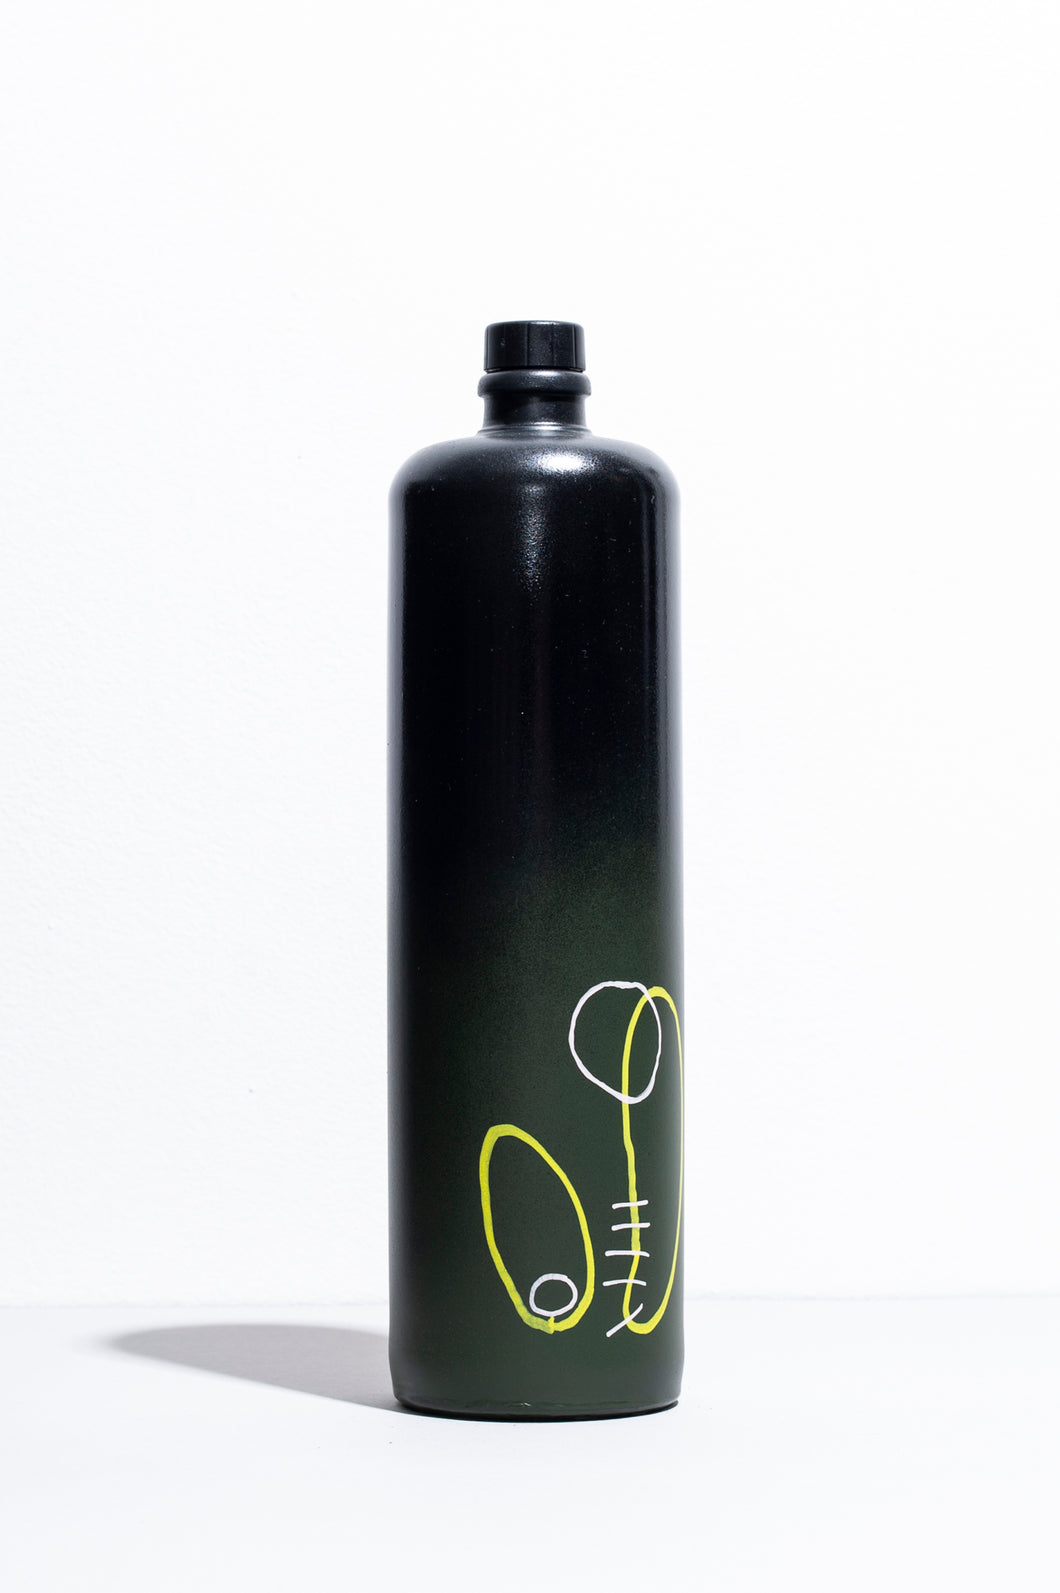 N°17 ART EDITION / UNFILTERED VIRGIN OLIVE OIL EXTRA 1L